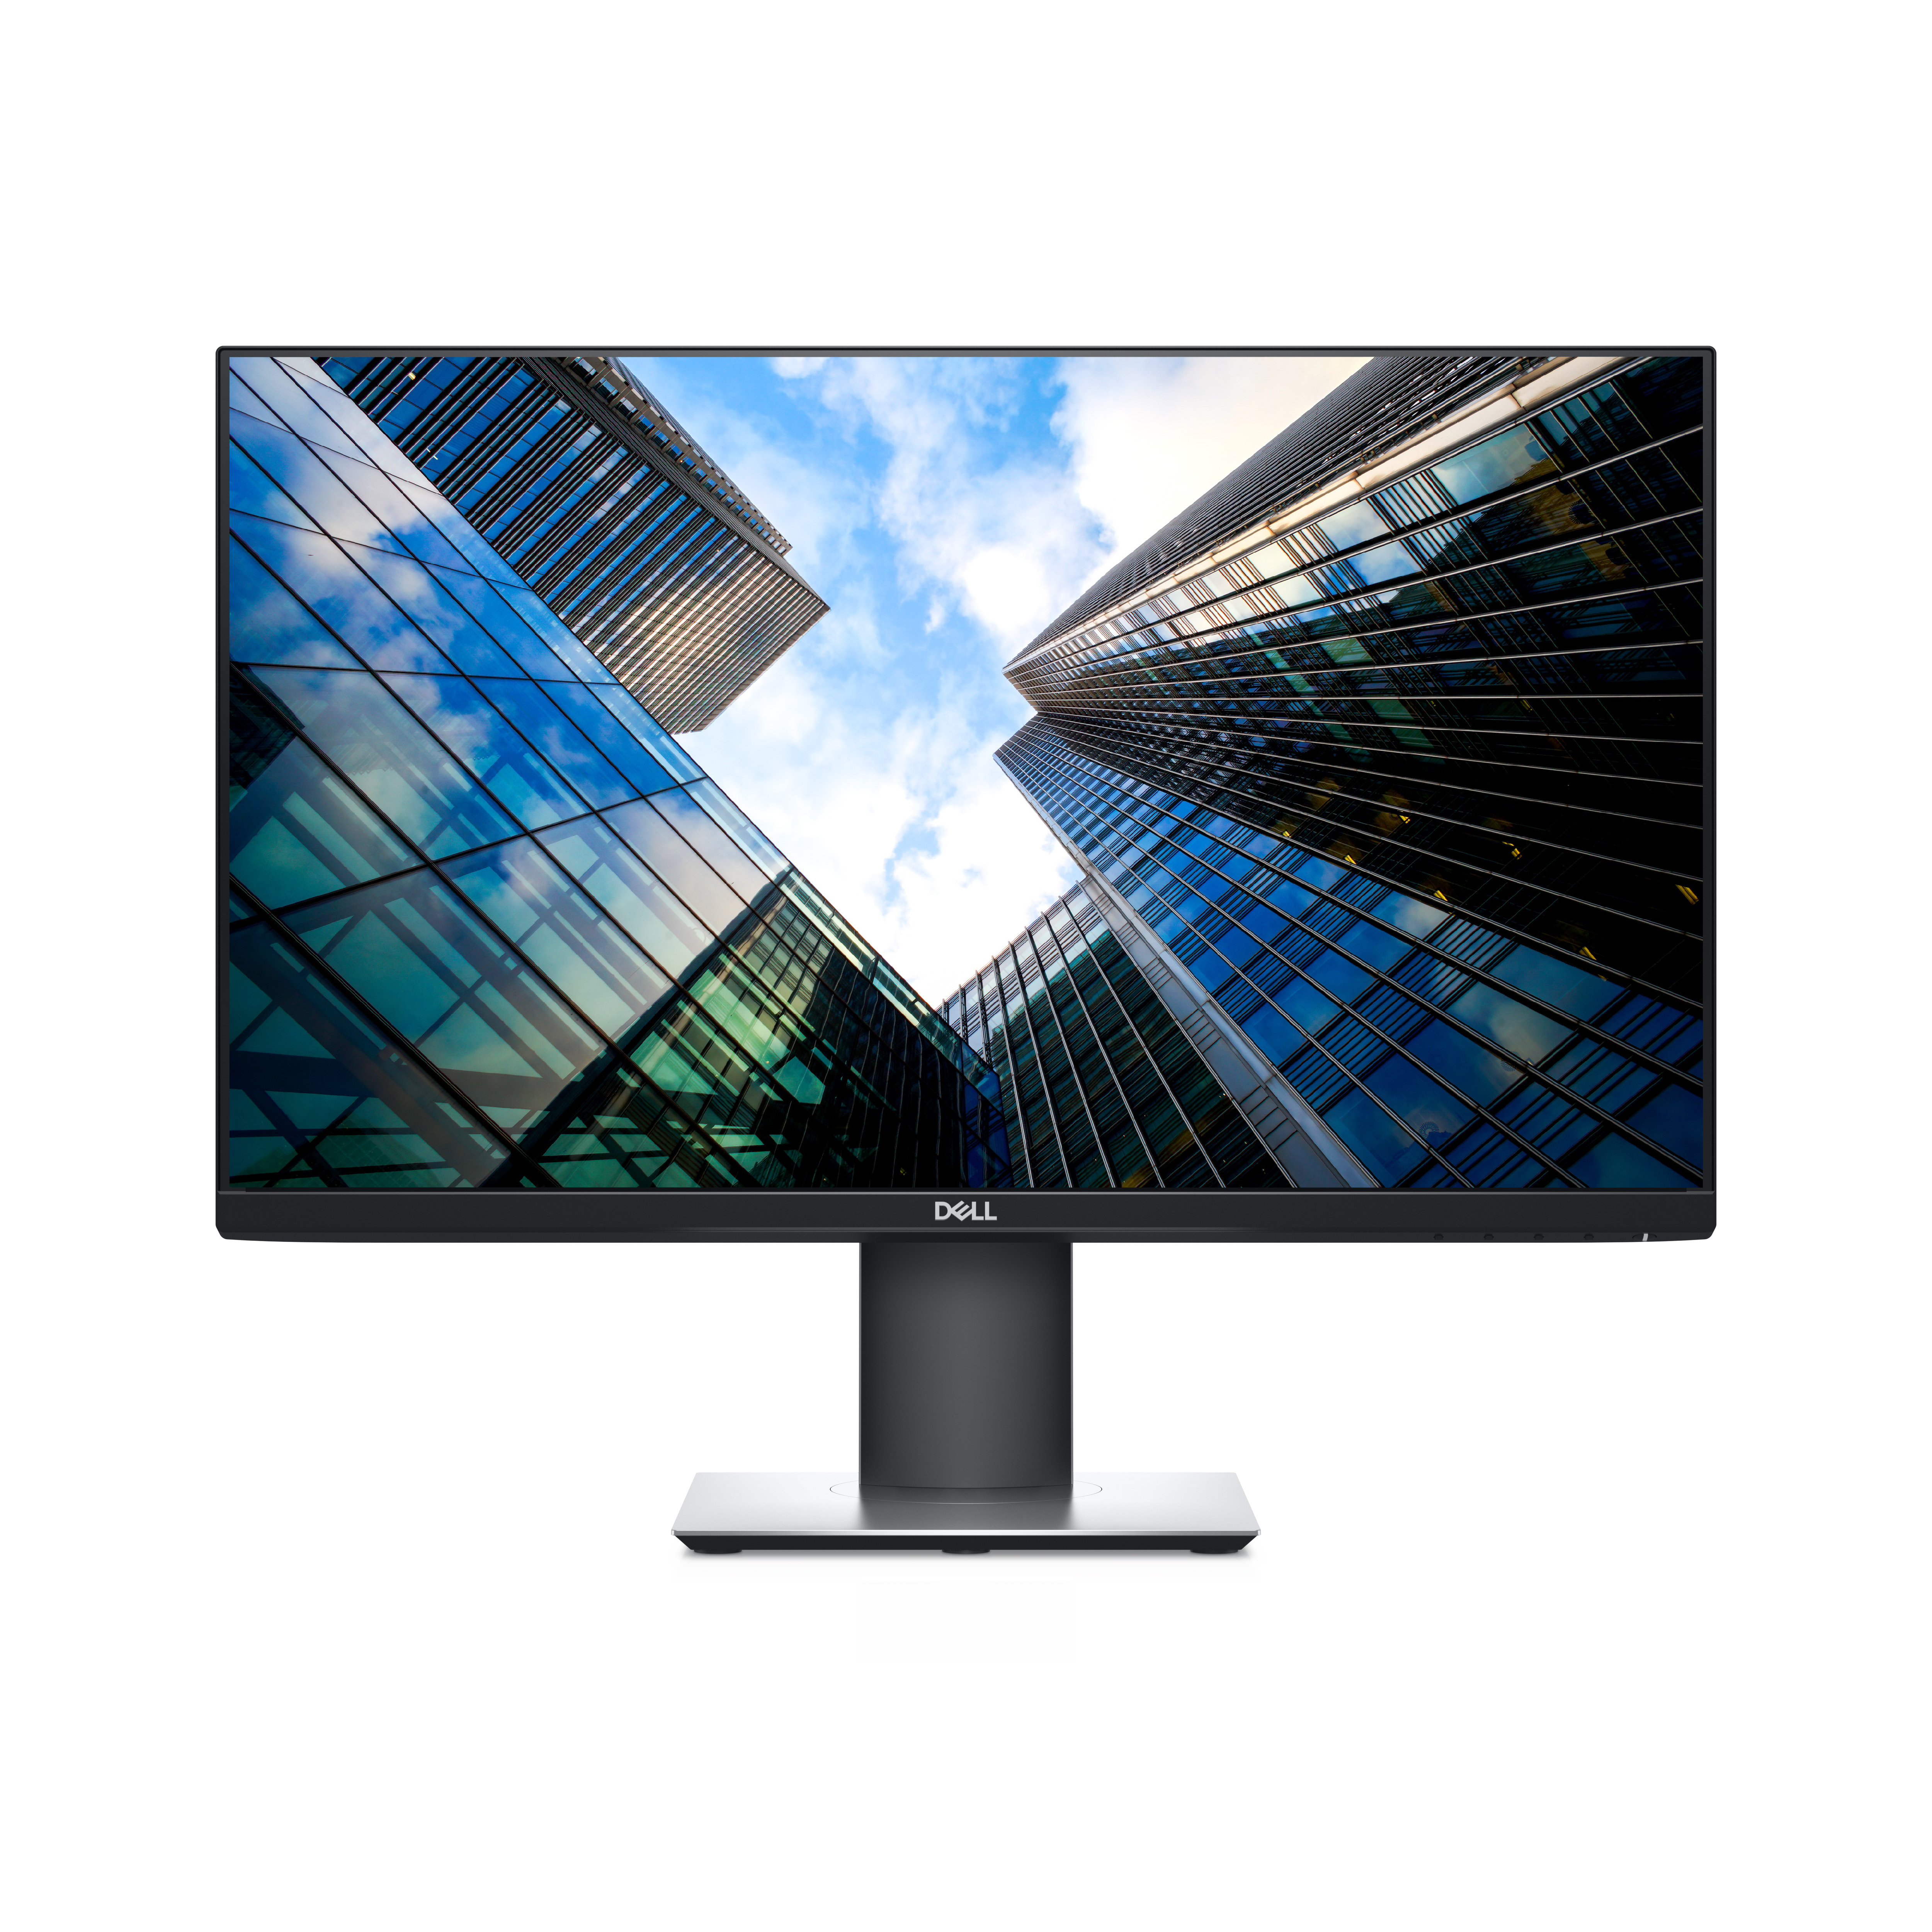 Monitor DELL P2419H LED display 61 cm (24